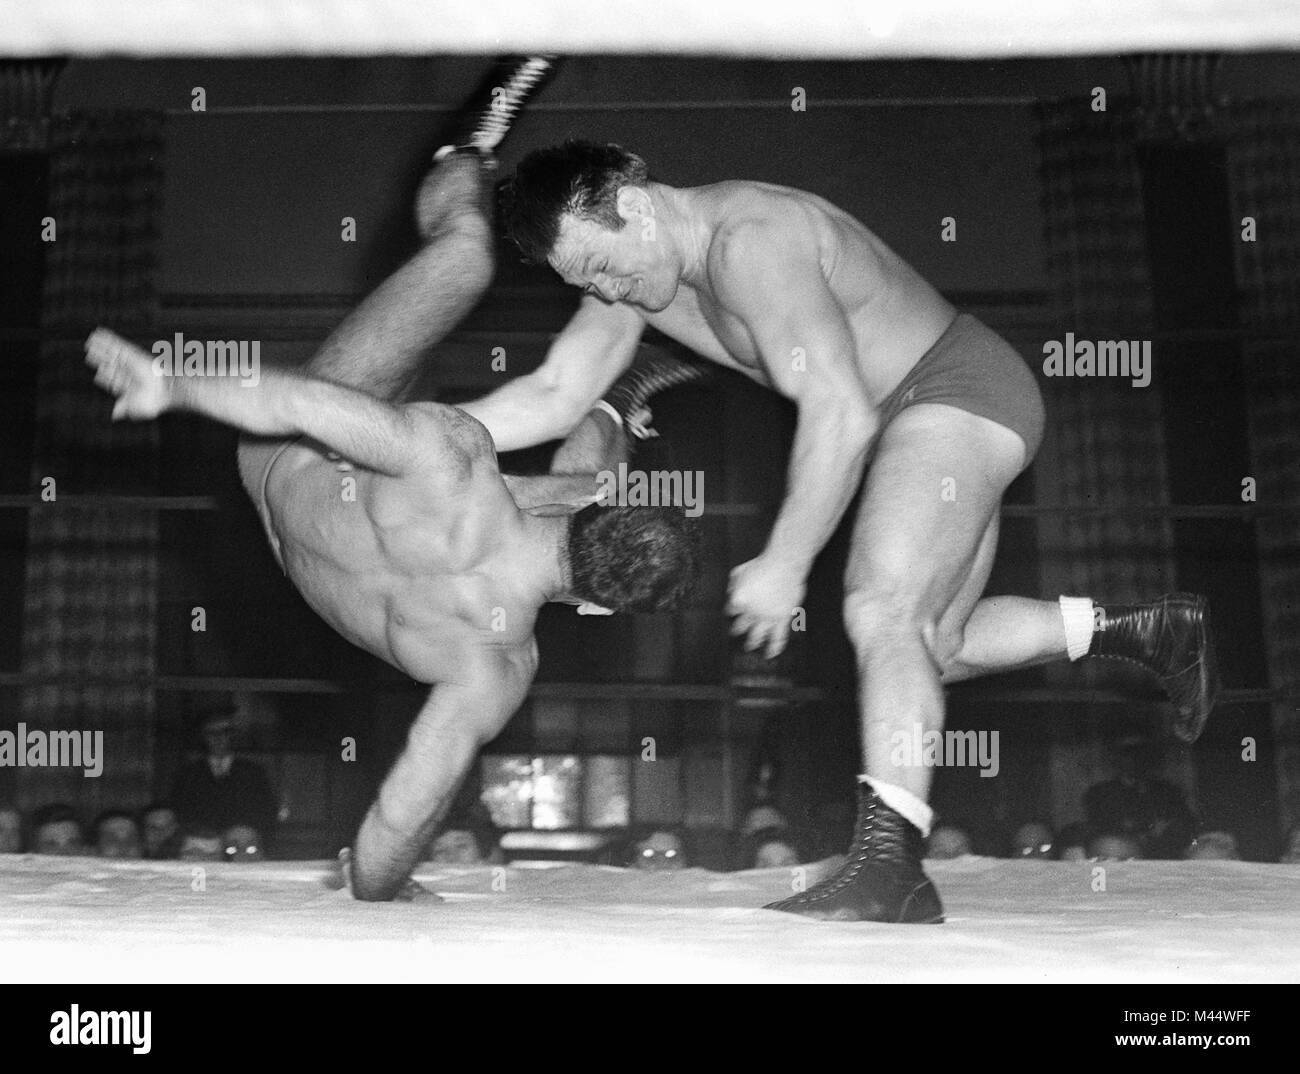 Two grapplers face off in a wrestling match in Chicago, ca. 1950. Stock Photo